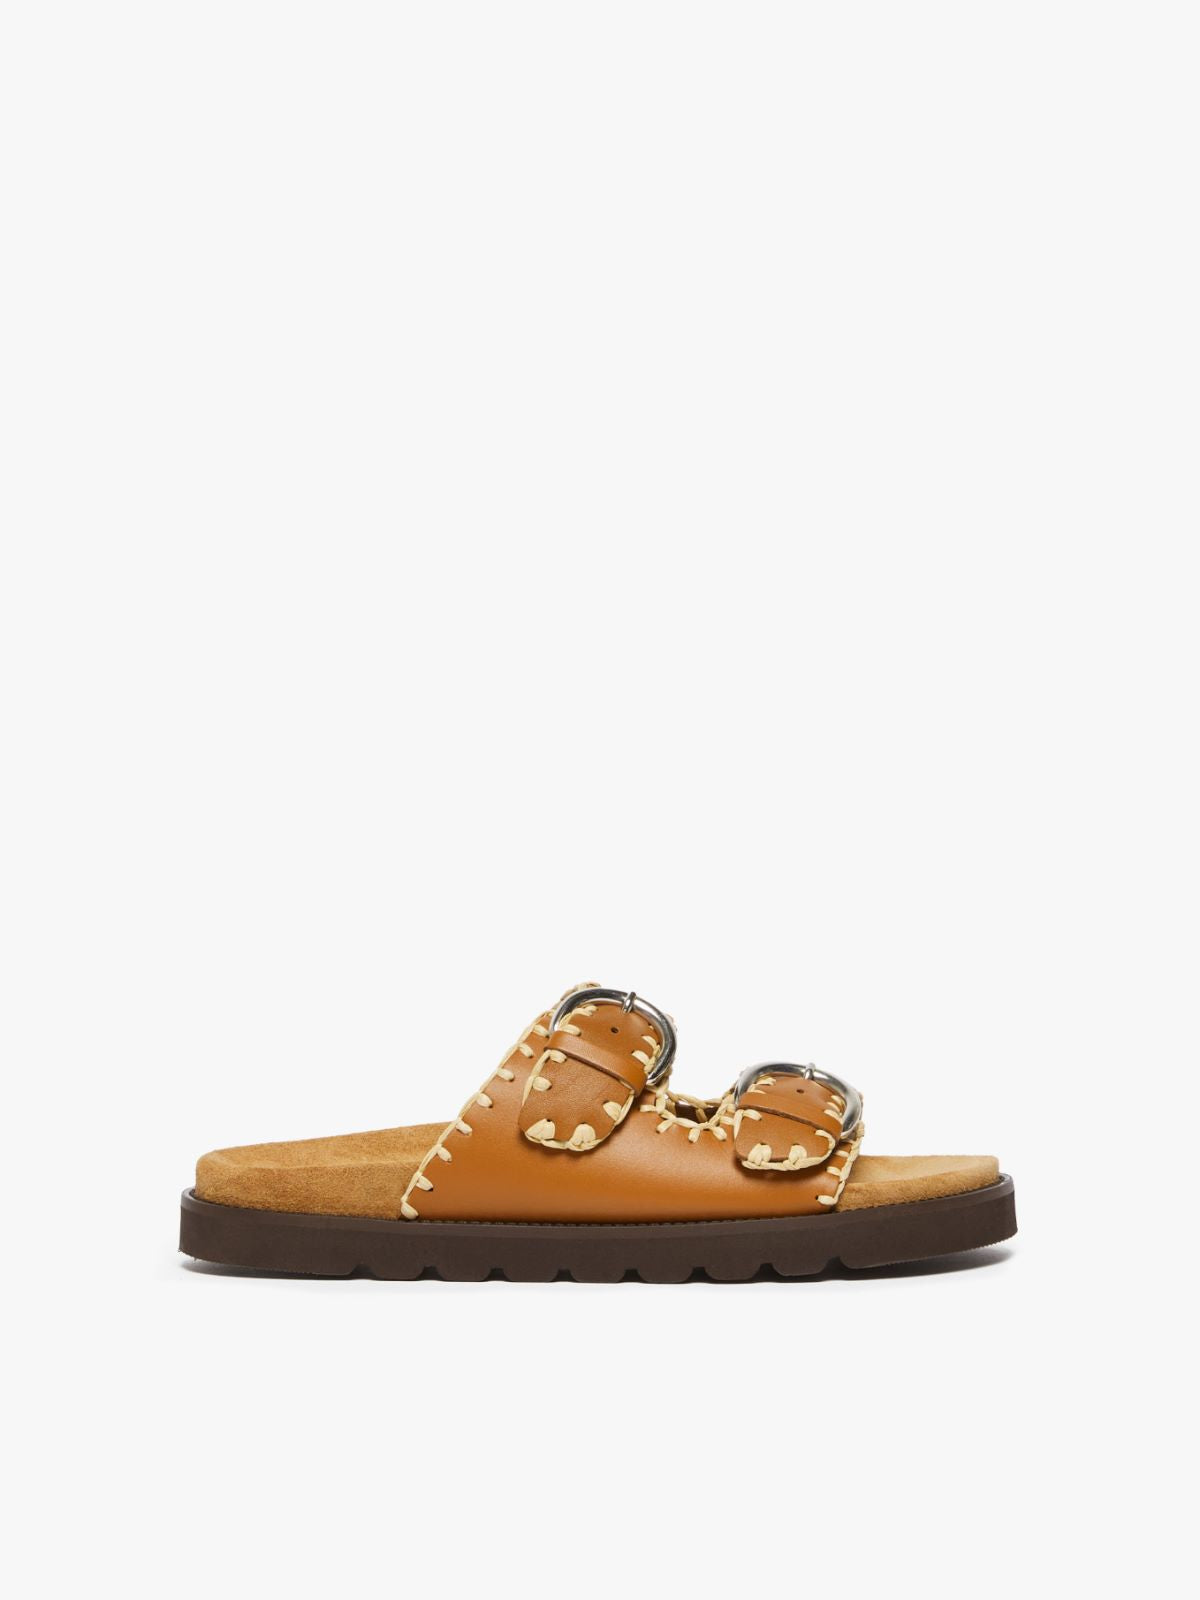 MM Abate Sandals in Natural